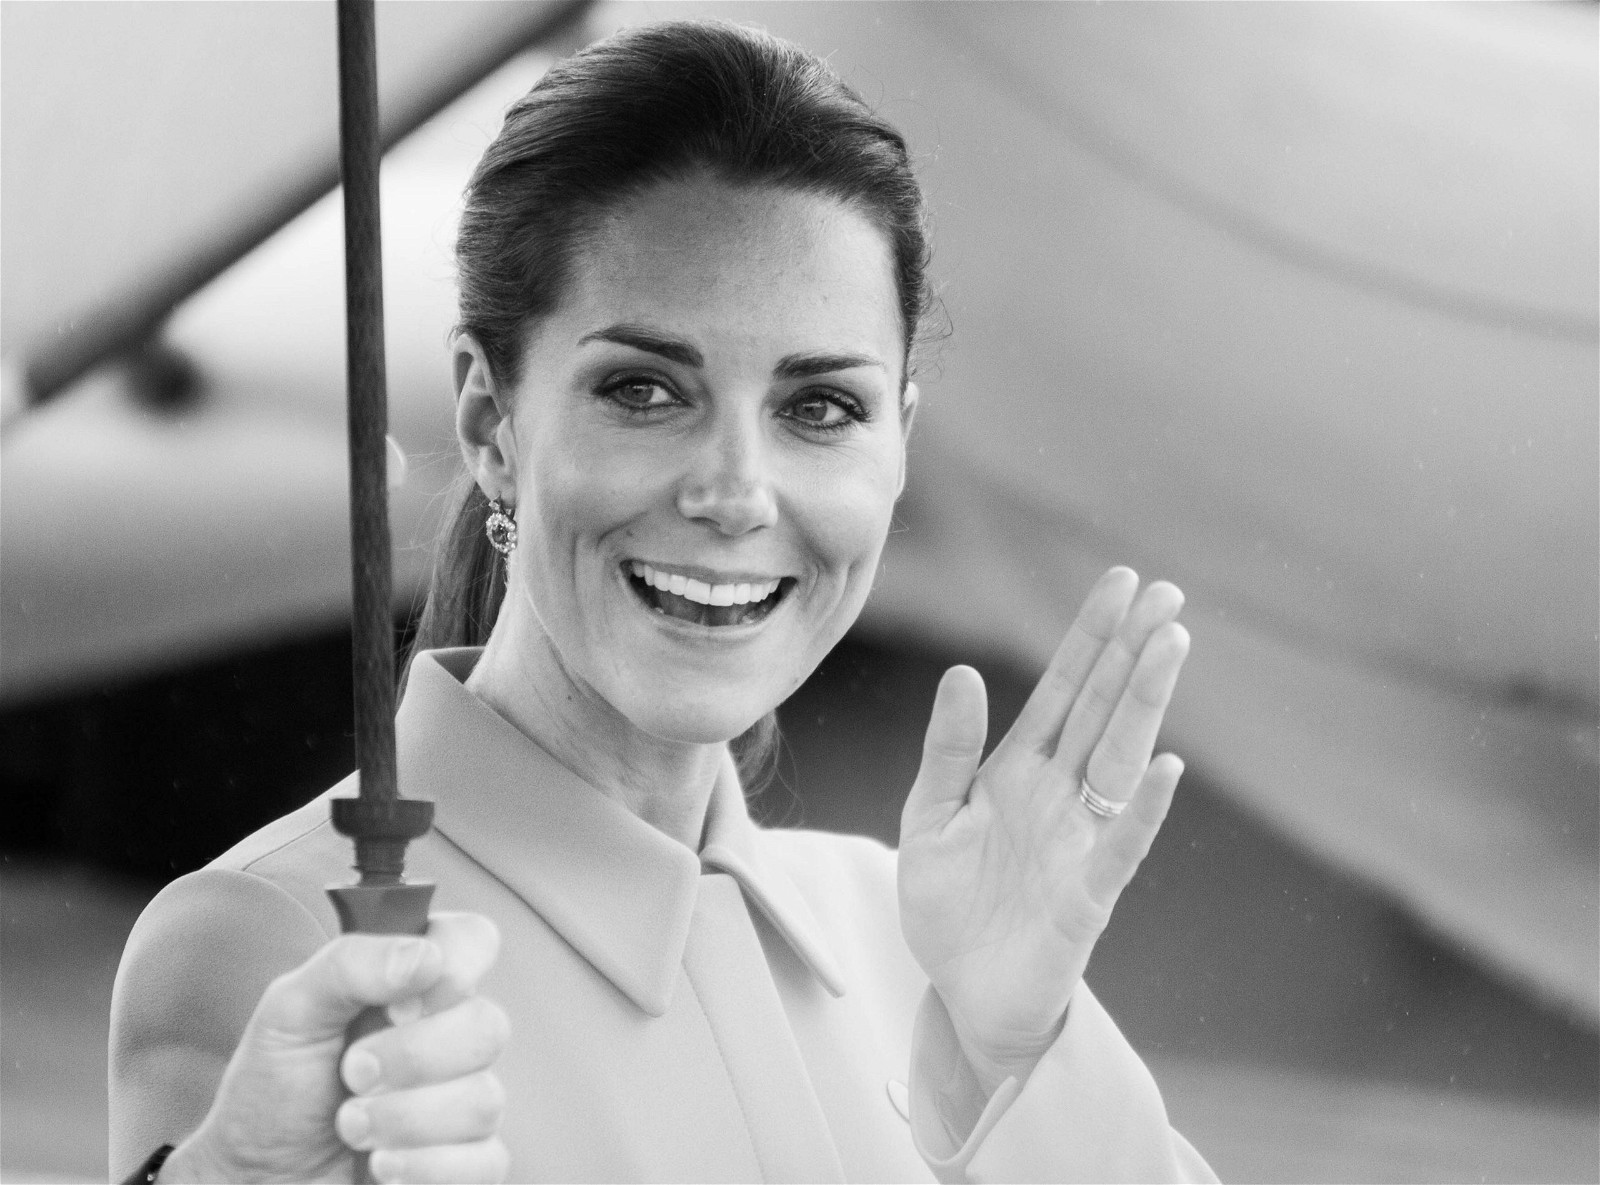 Kate Middleton | Credit: Ricky Wilson for Wikimedia Commons